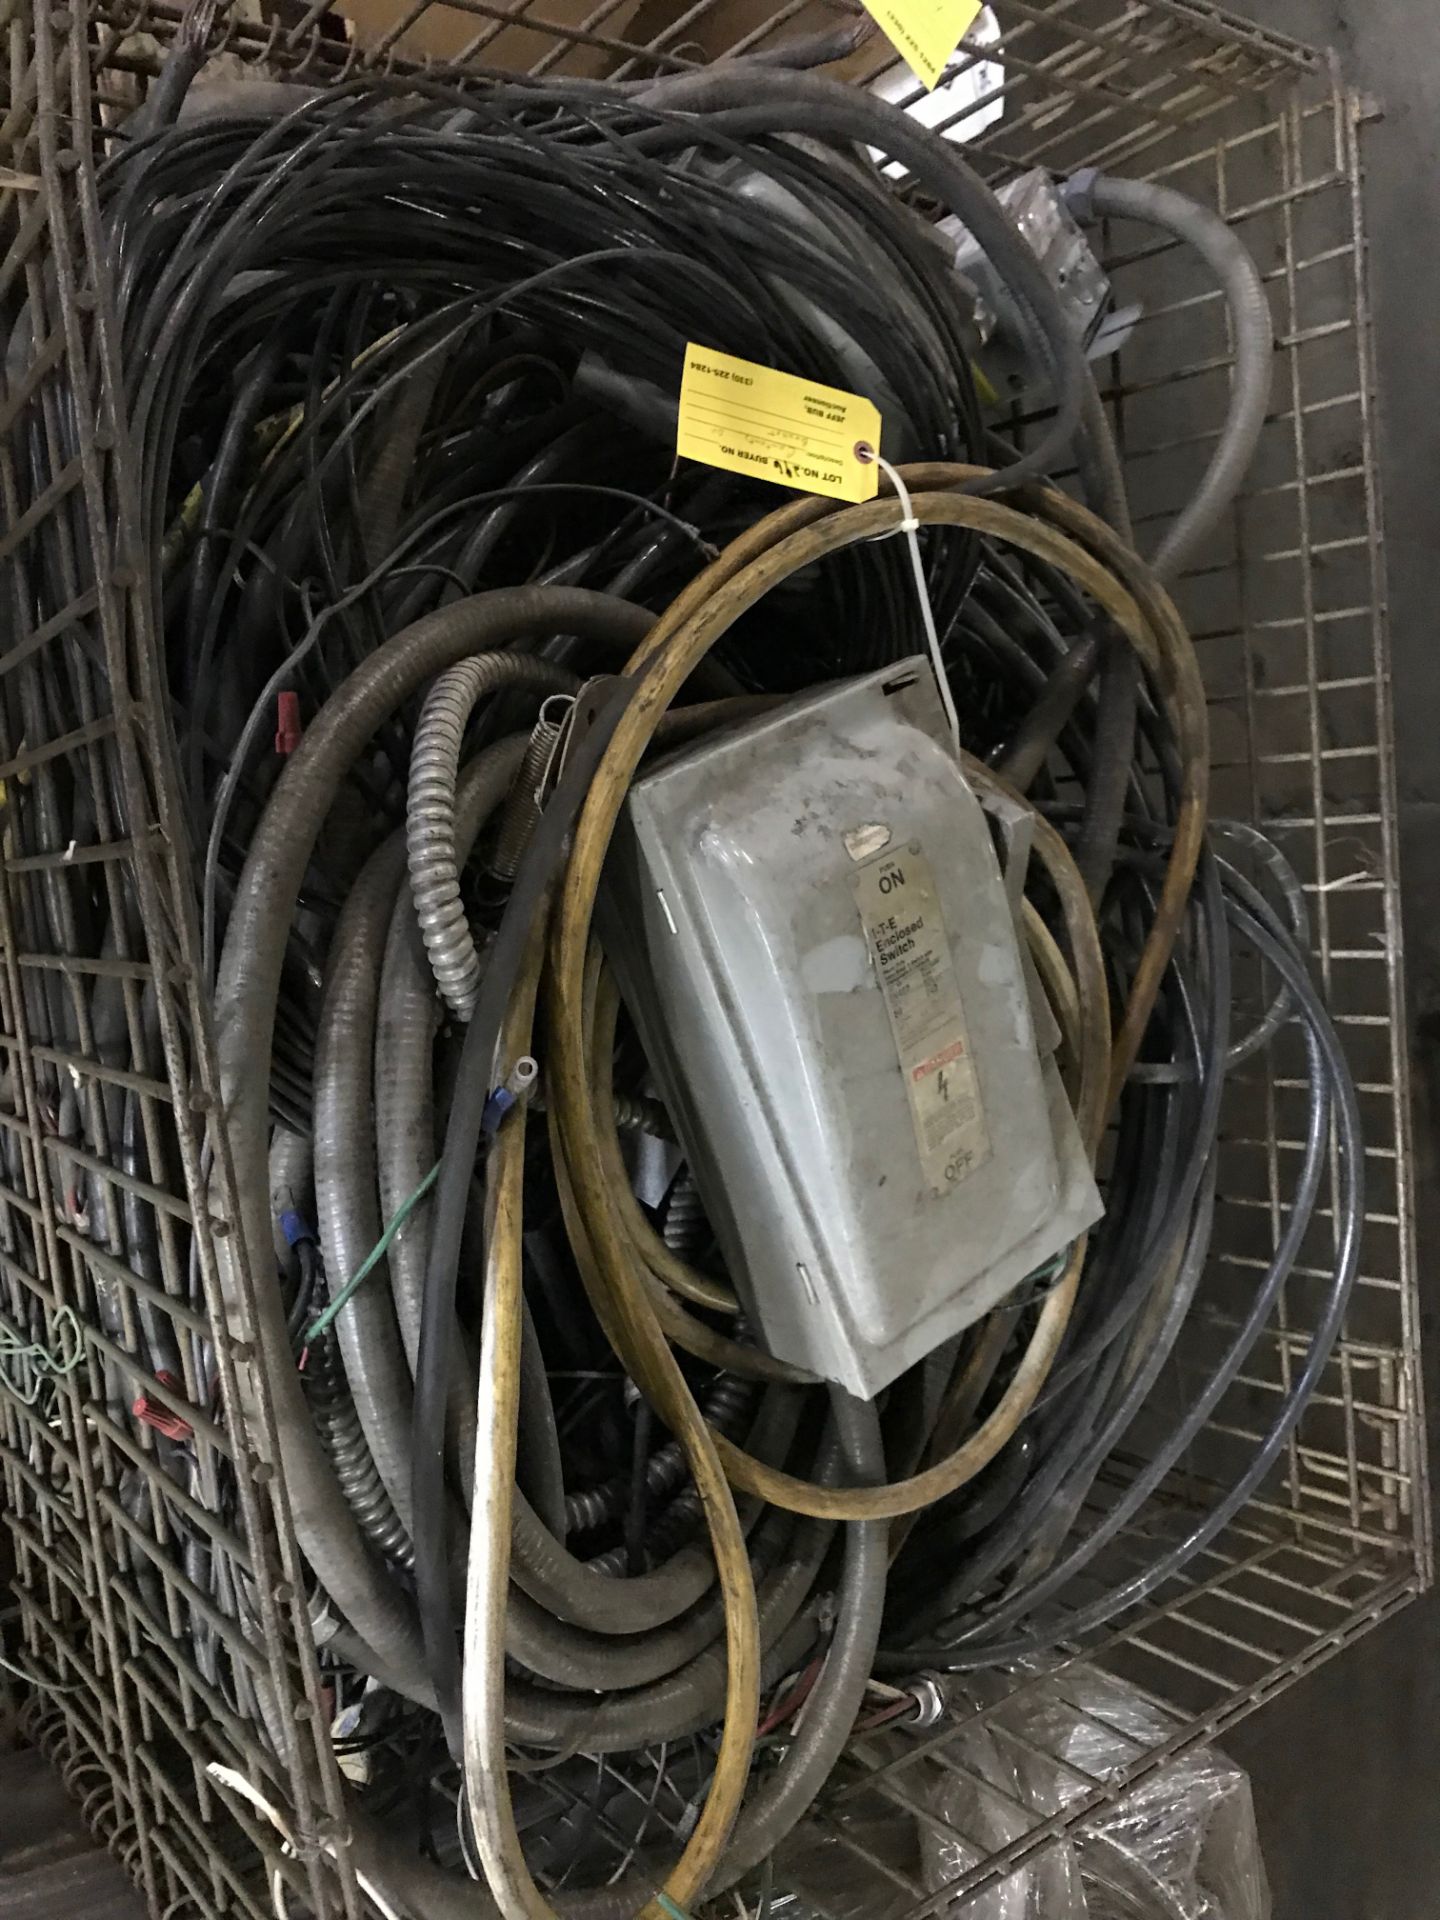 Contents of Wire Basket